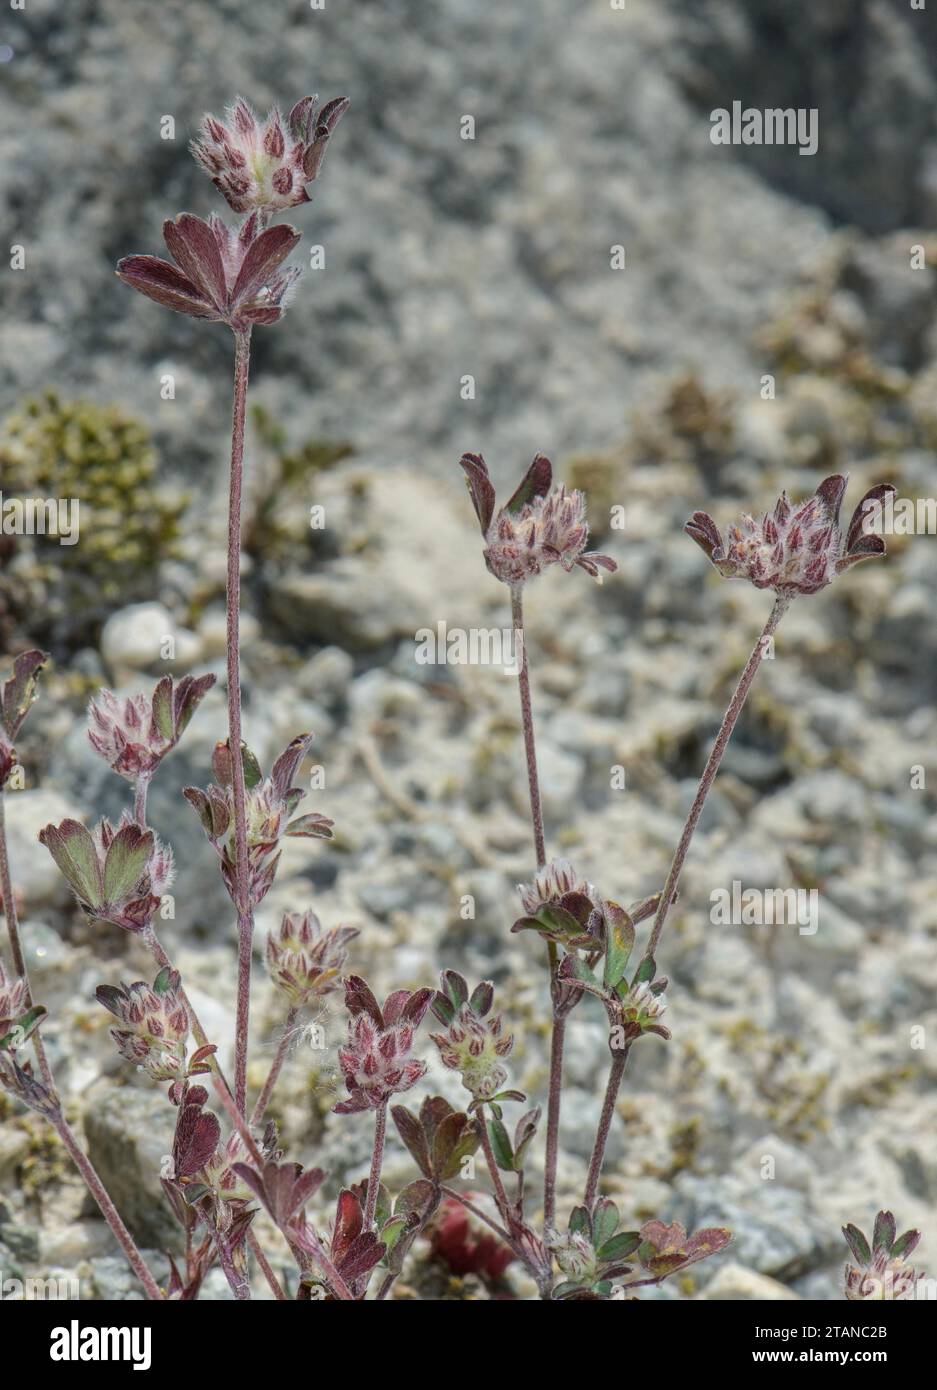 Rock Clover, Trifolium saxatile, in flower on glacial morraine in the French Alps. Stock Photo